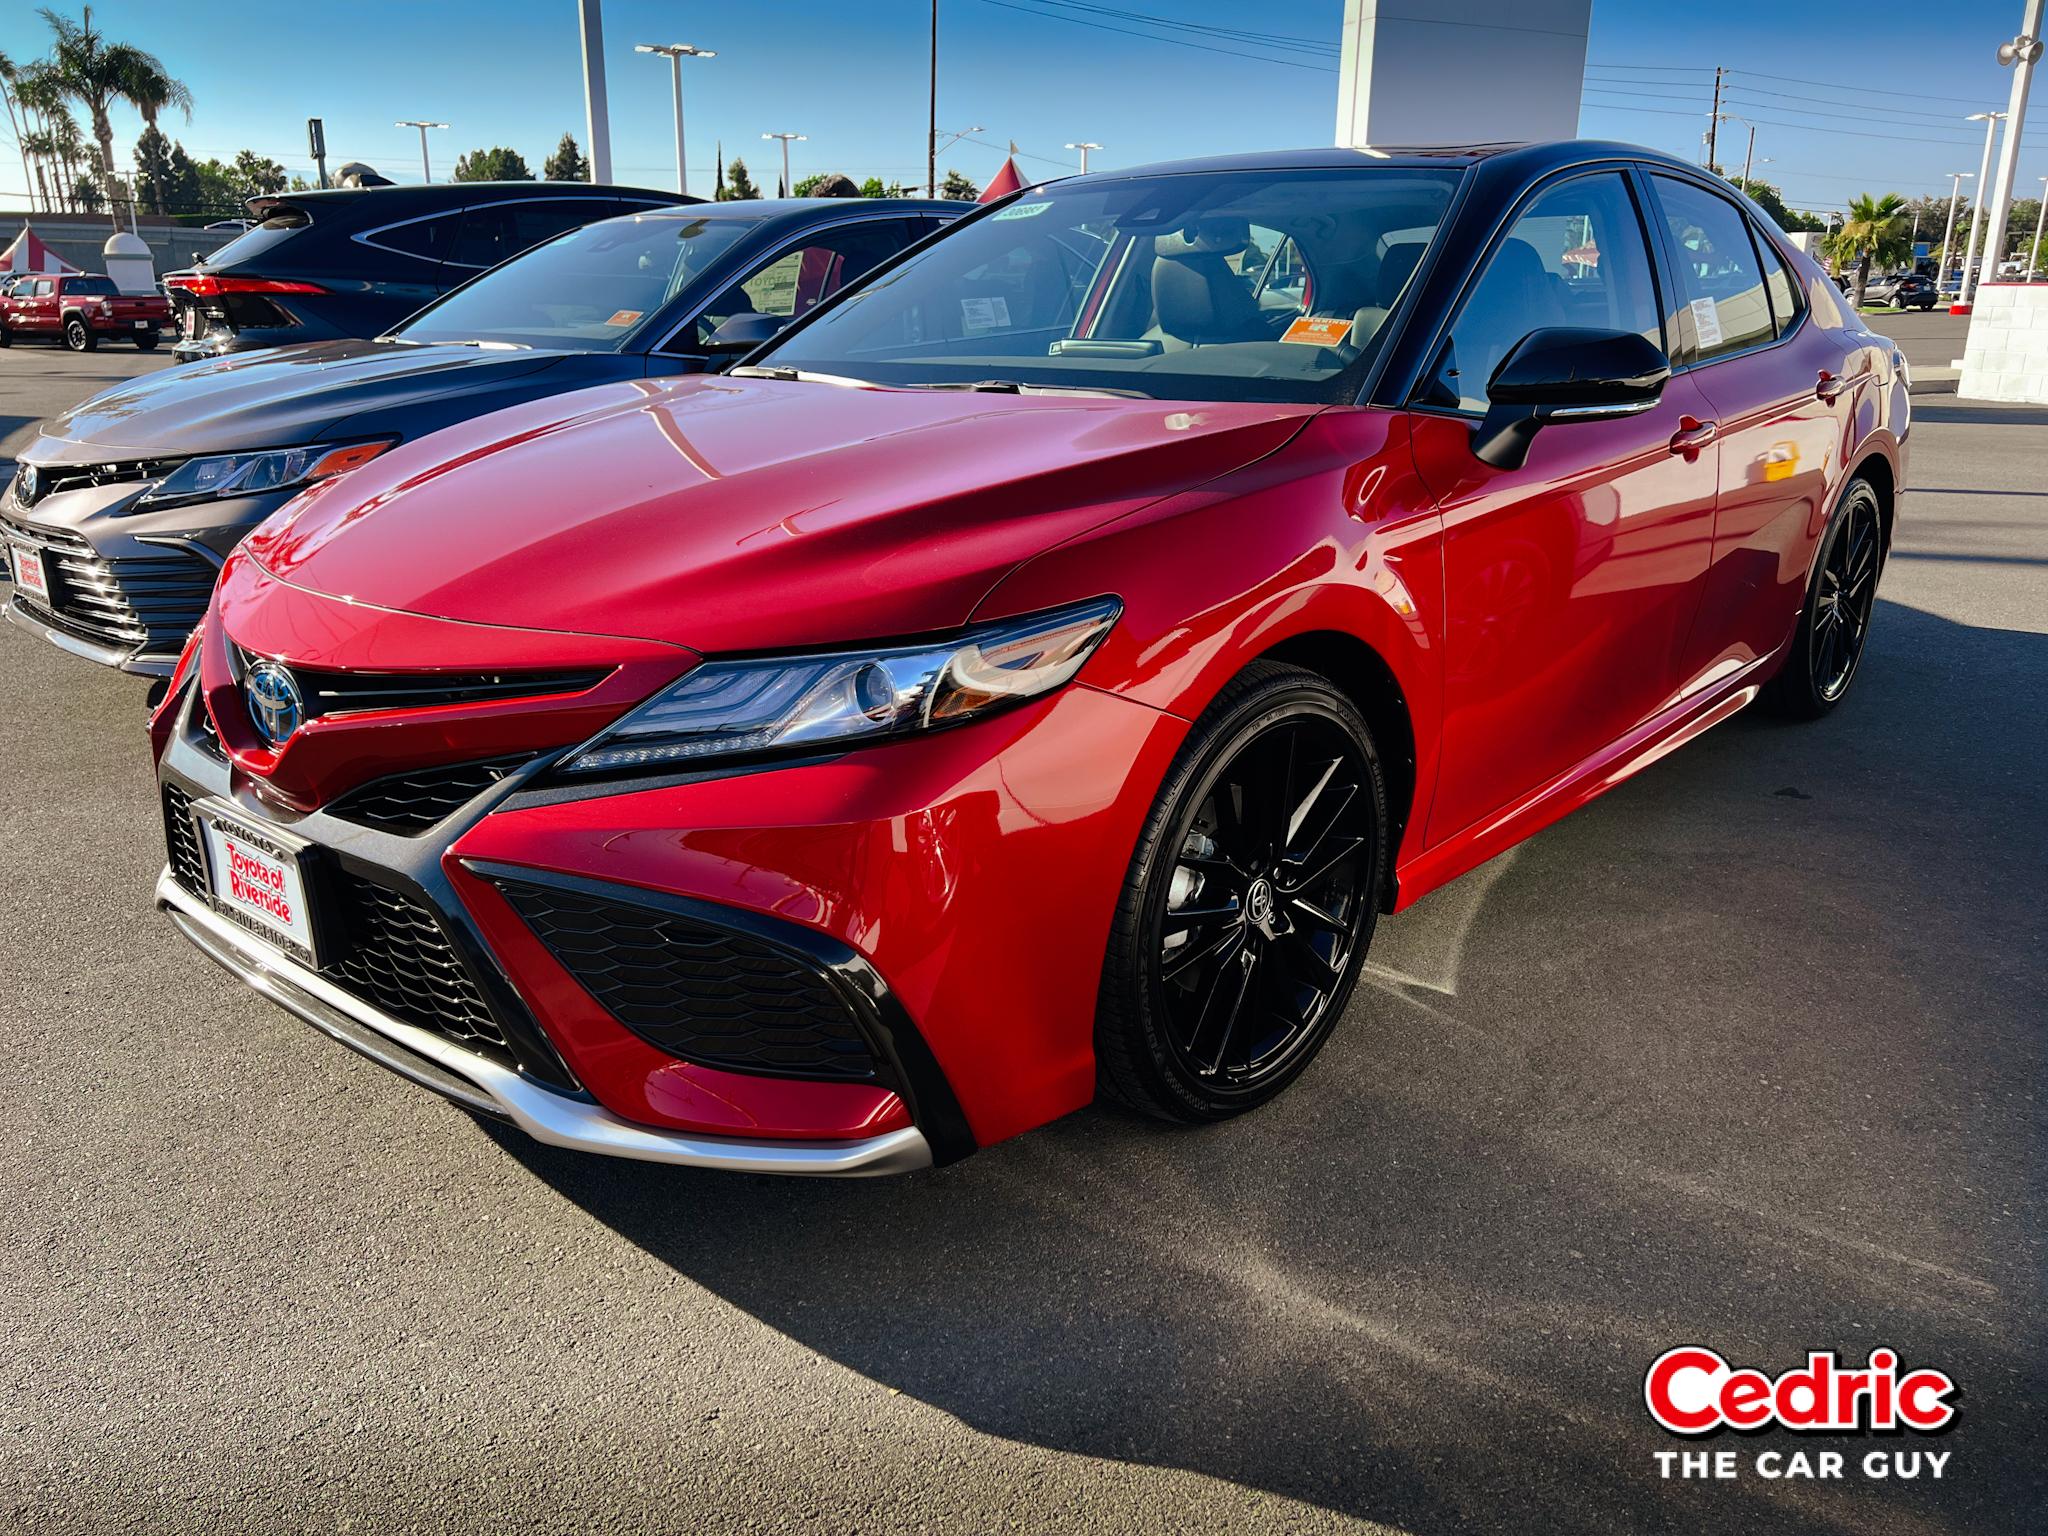 Toyota Camry XSE Hybrid in Supersonic Red Metallic with Black Roof, Black Wheels and comes standard with Vehicle Stability Control